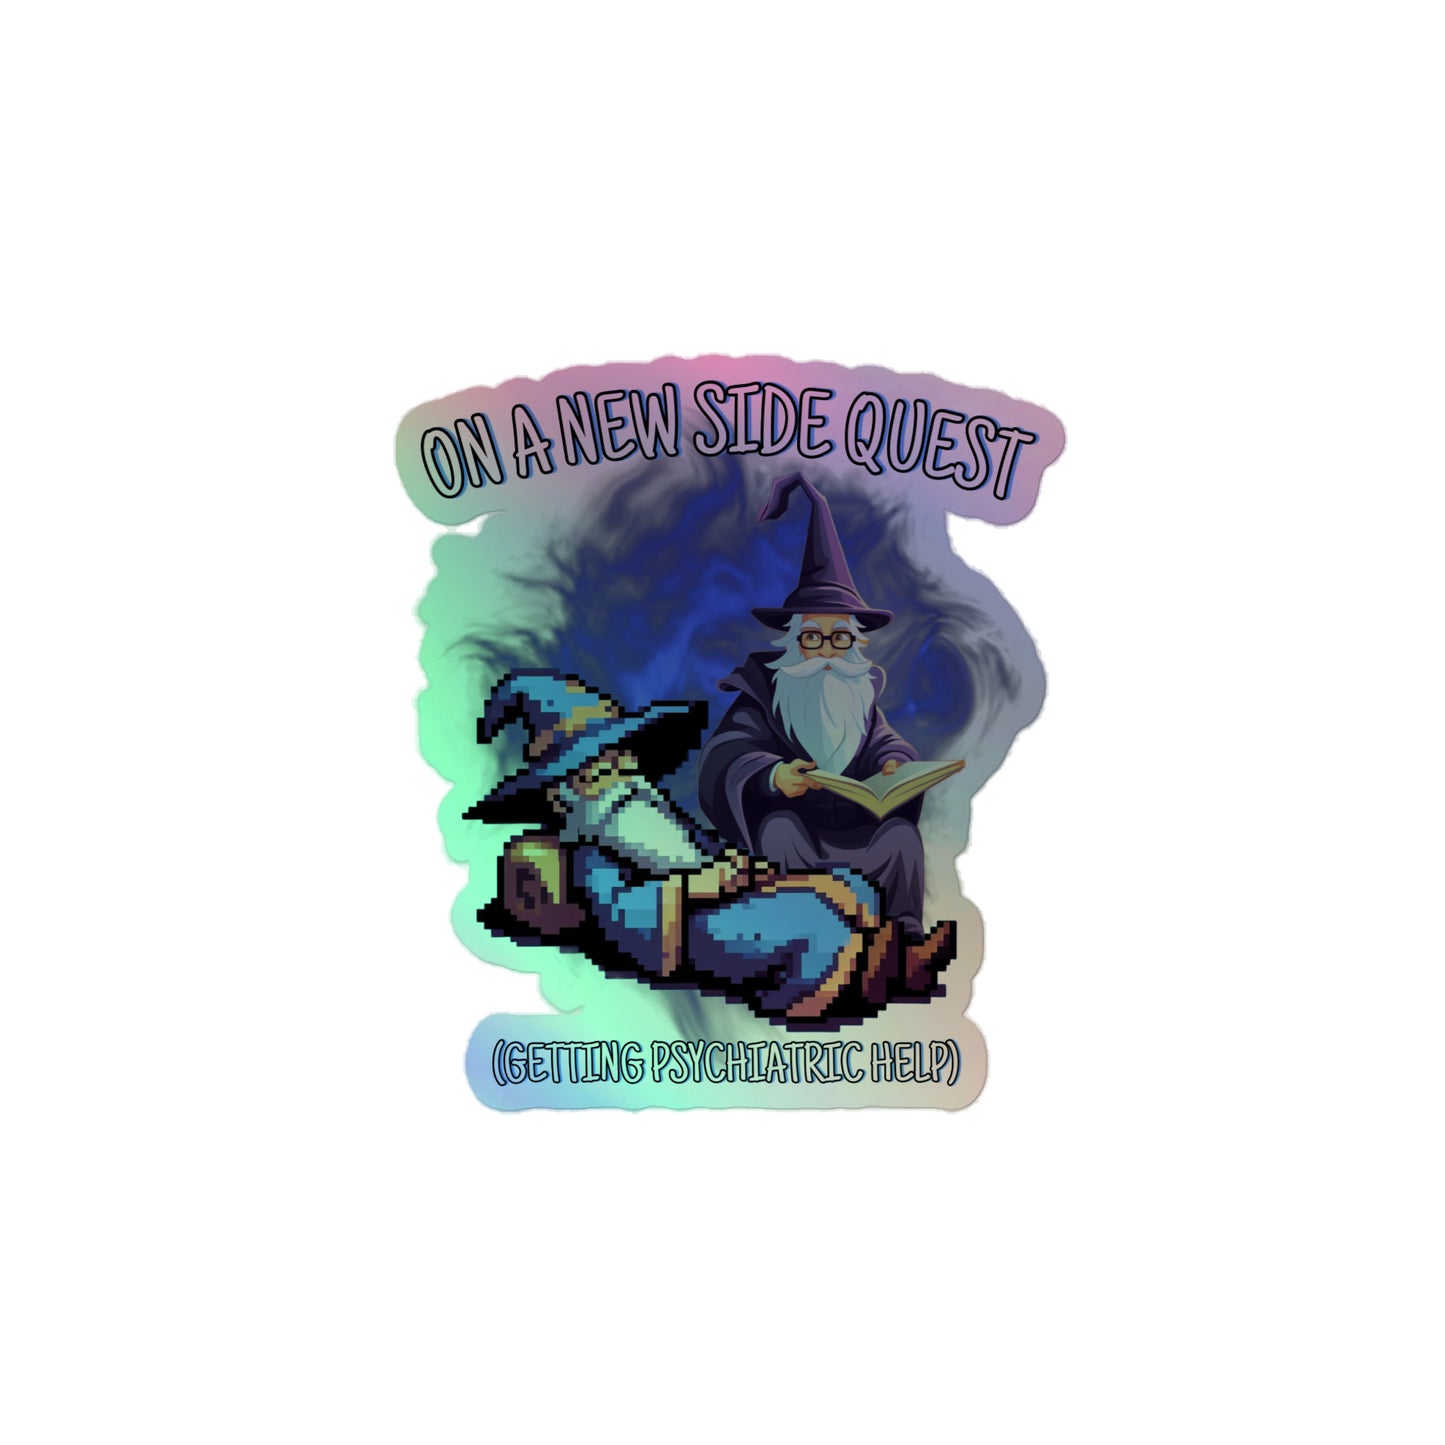 On a new side quest (getting psychiatric help) (Sticker)